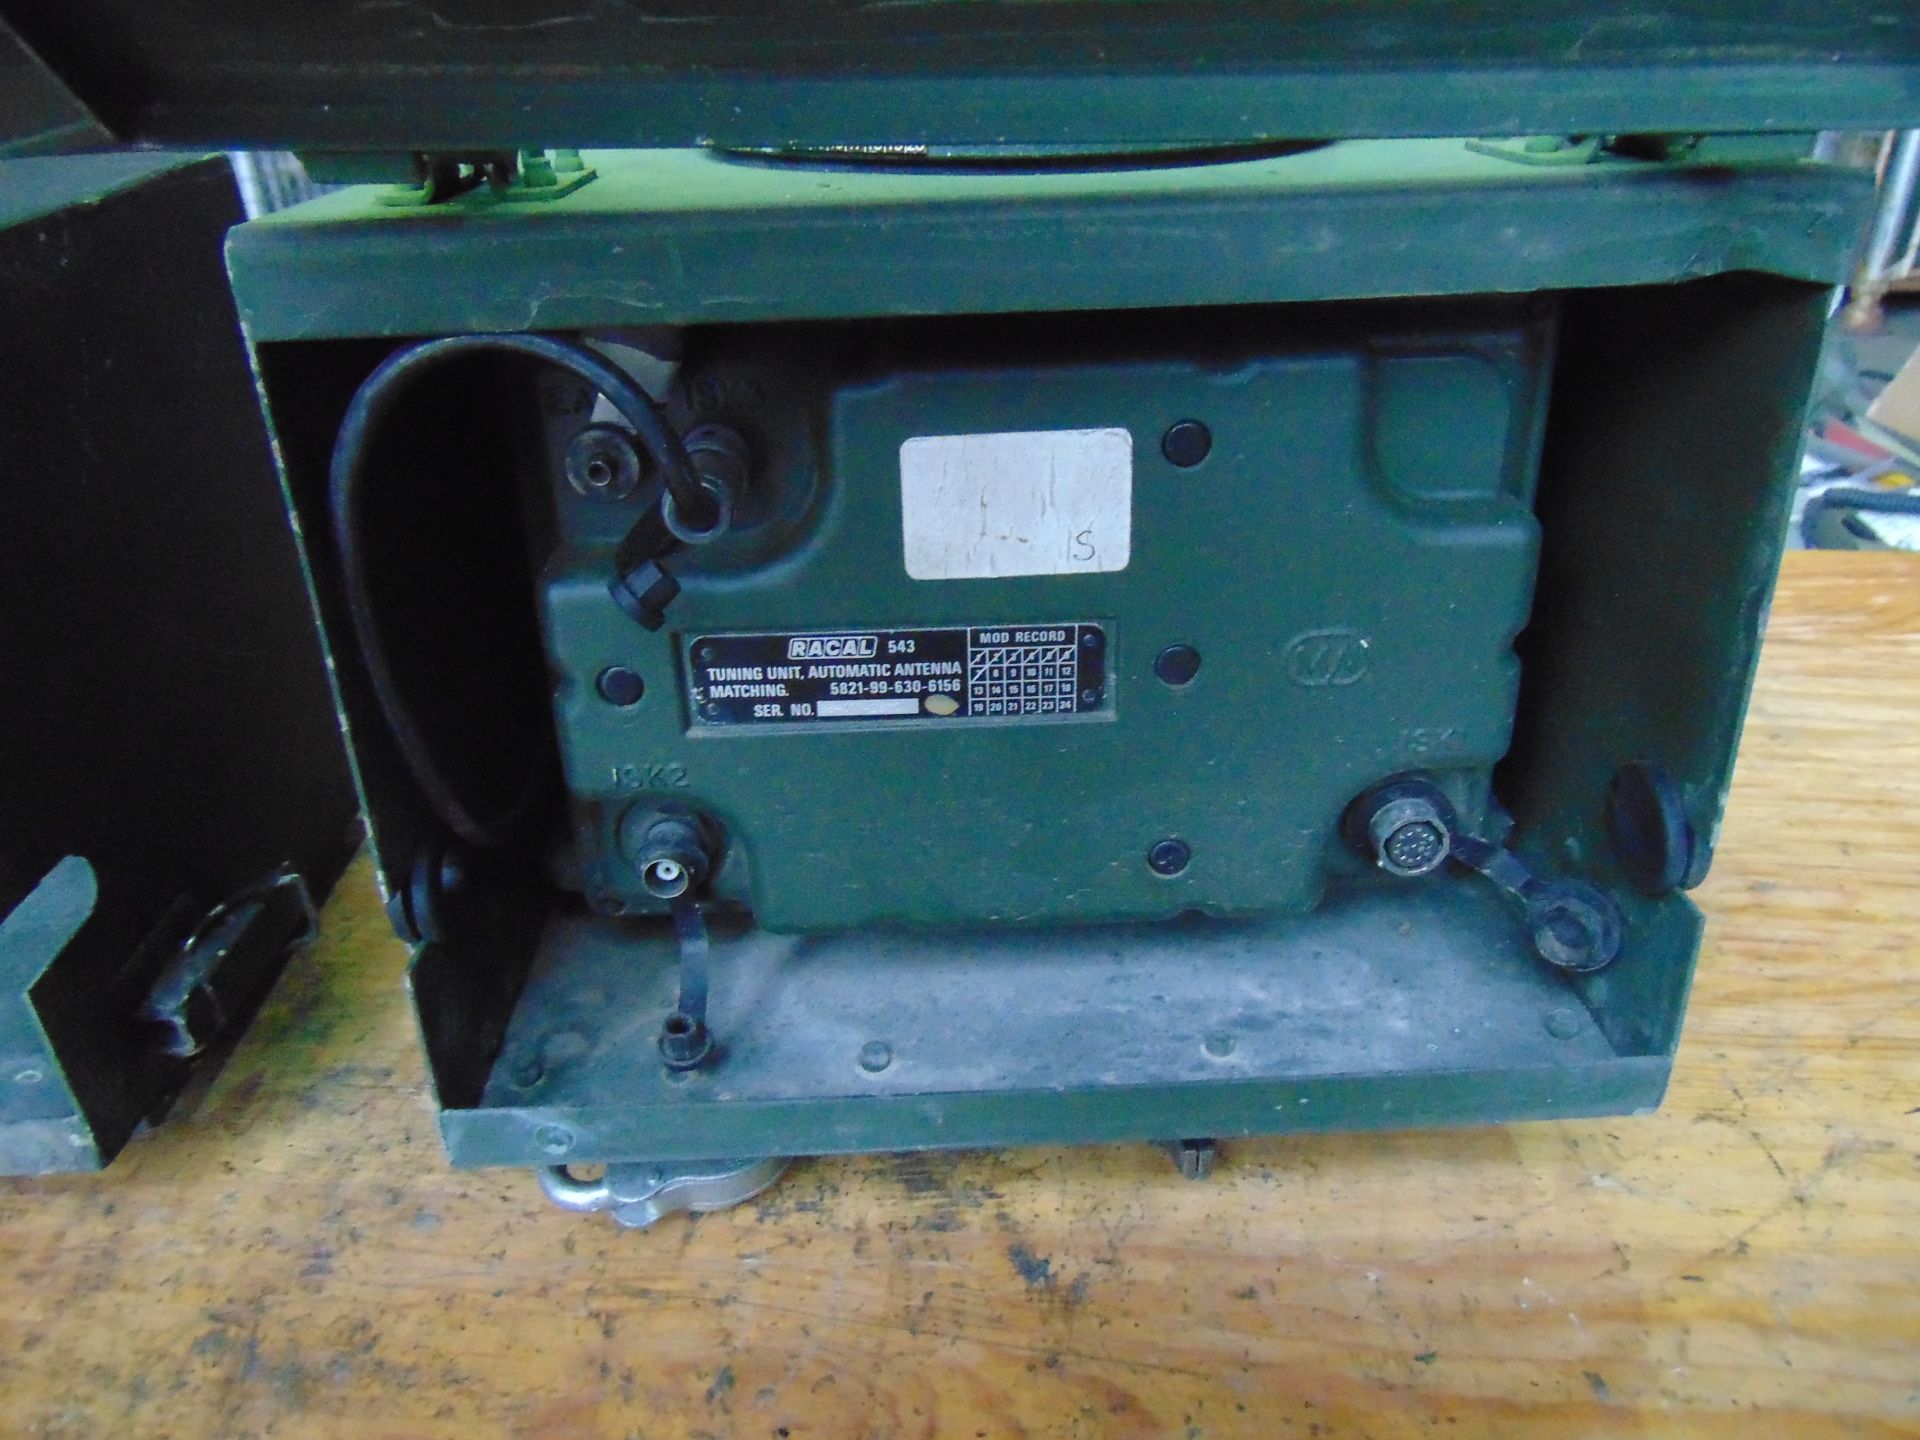 2 x Land Rover FFR Antenna Wing Boxes c/w Base and Tuning Unit - Image 2 of 5